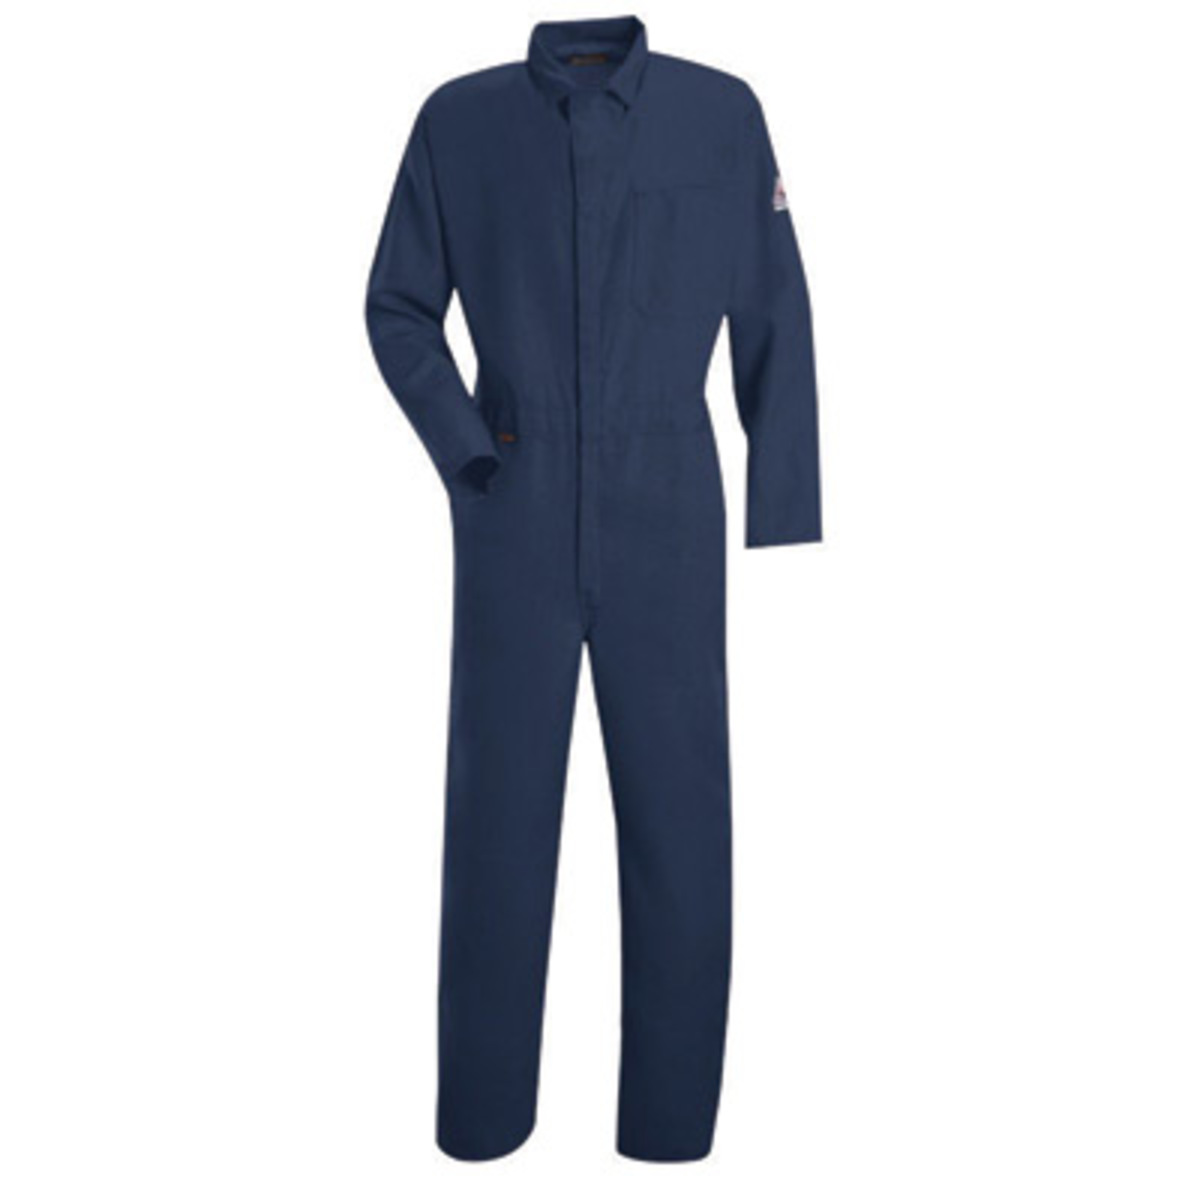 Stanco Safety Products™ 7X Navy Blue Nomex® IIIA Arc Rated Flame Resistant Coveralls With Concealed 2-Way Front Zipper Closure A